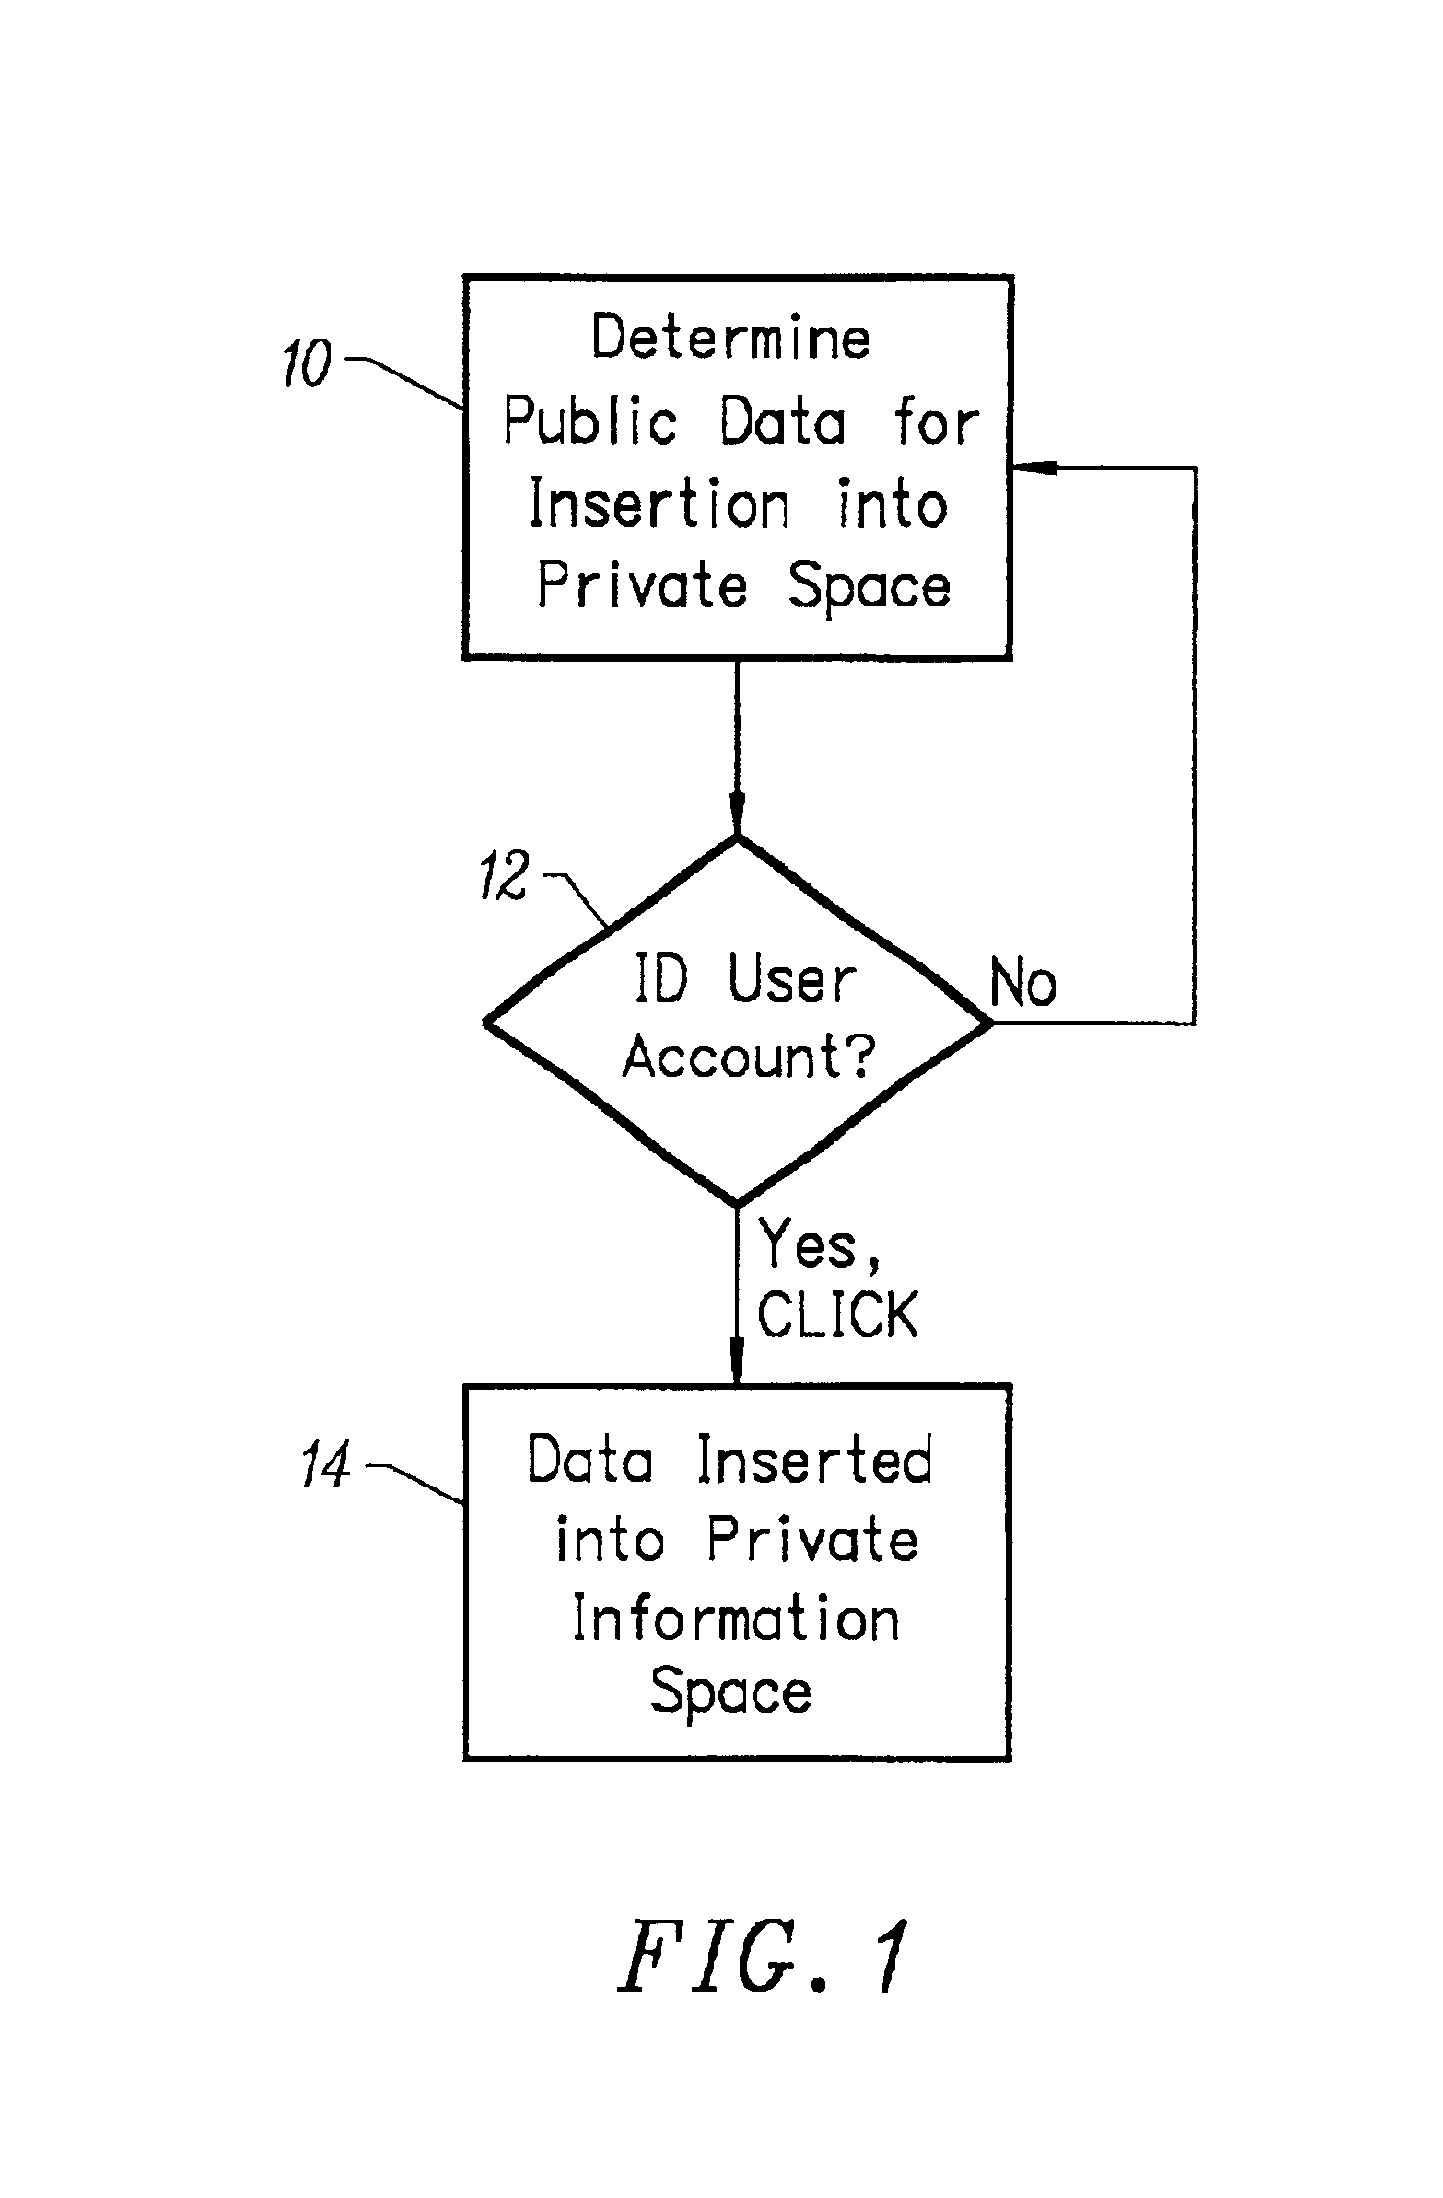 Single click synchronization of data from a public information store to a private information store